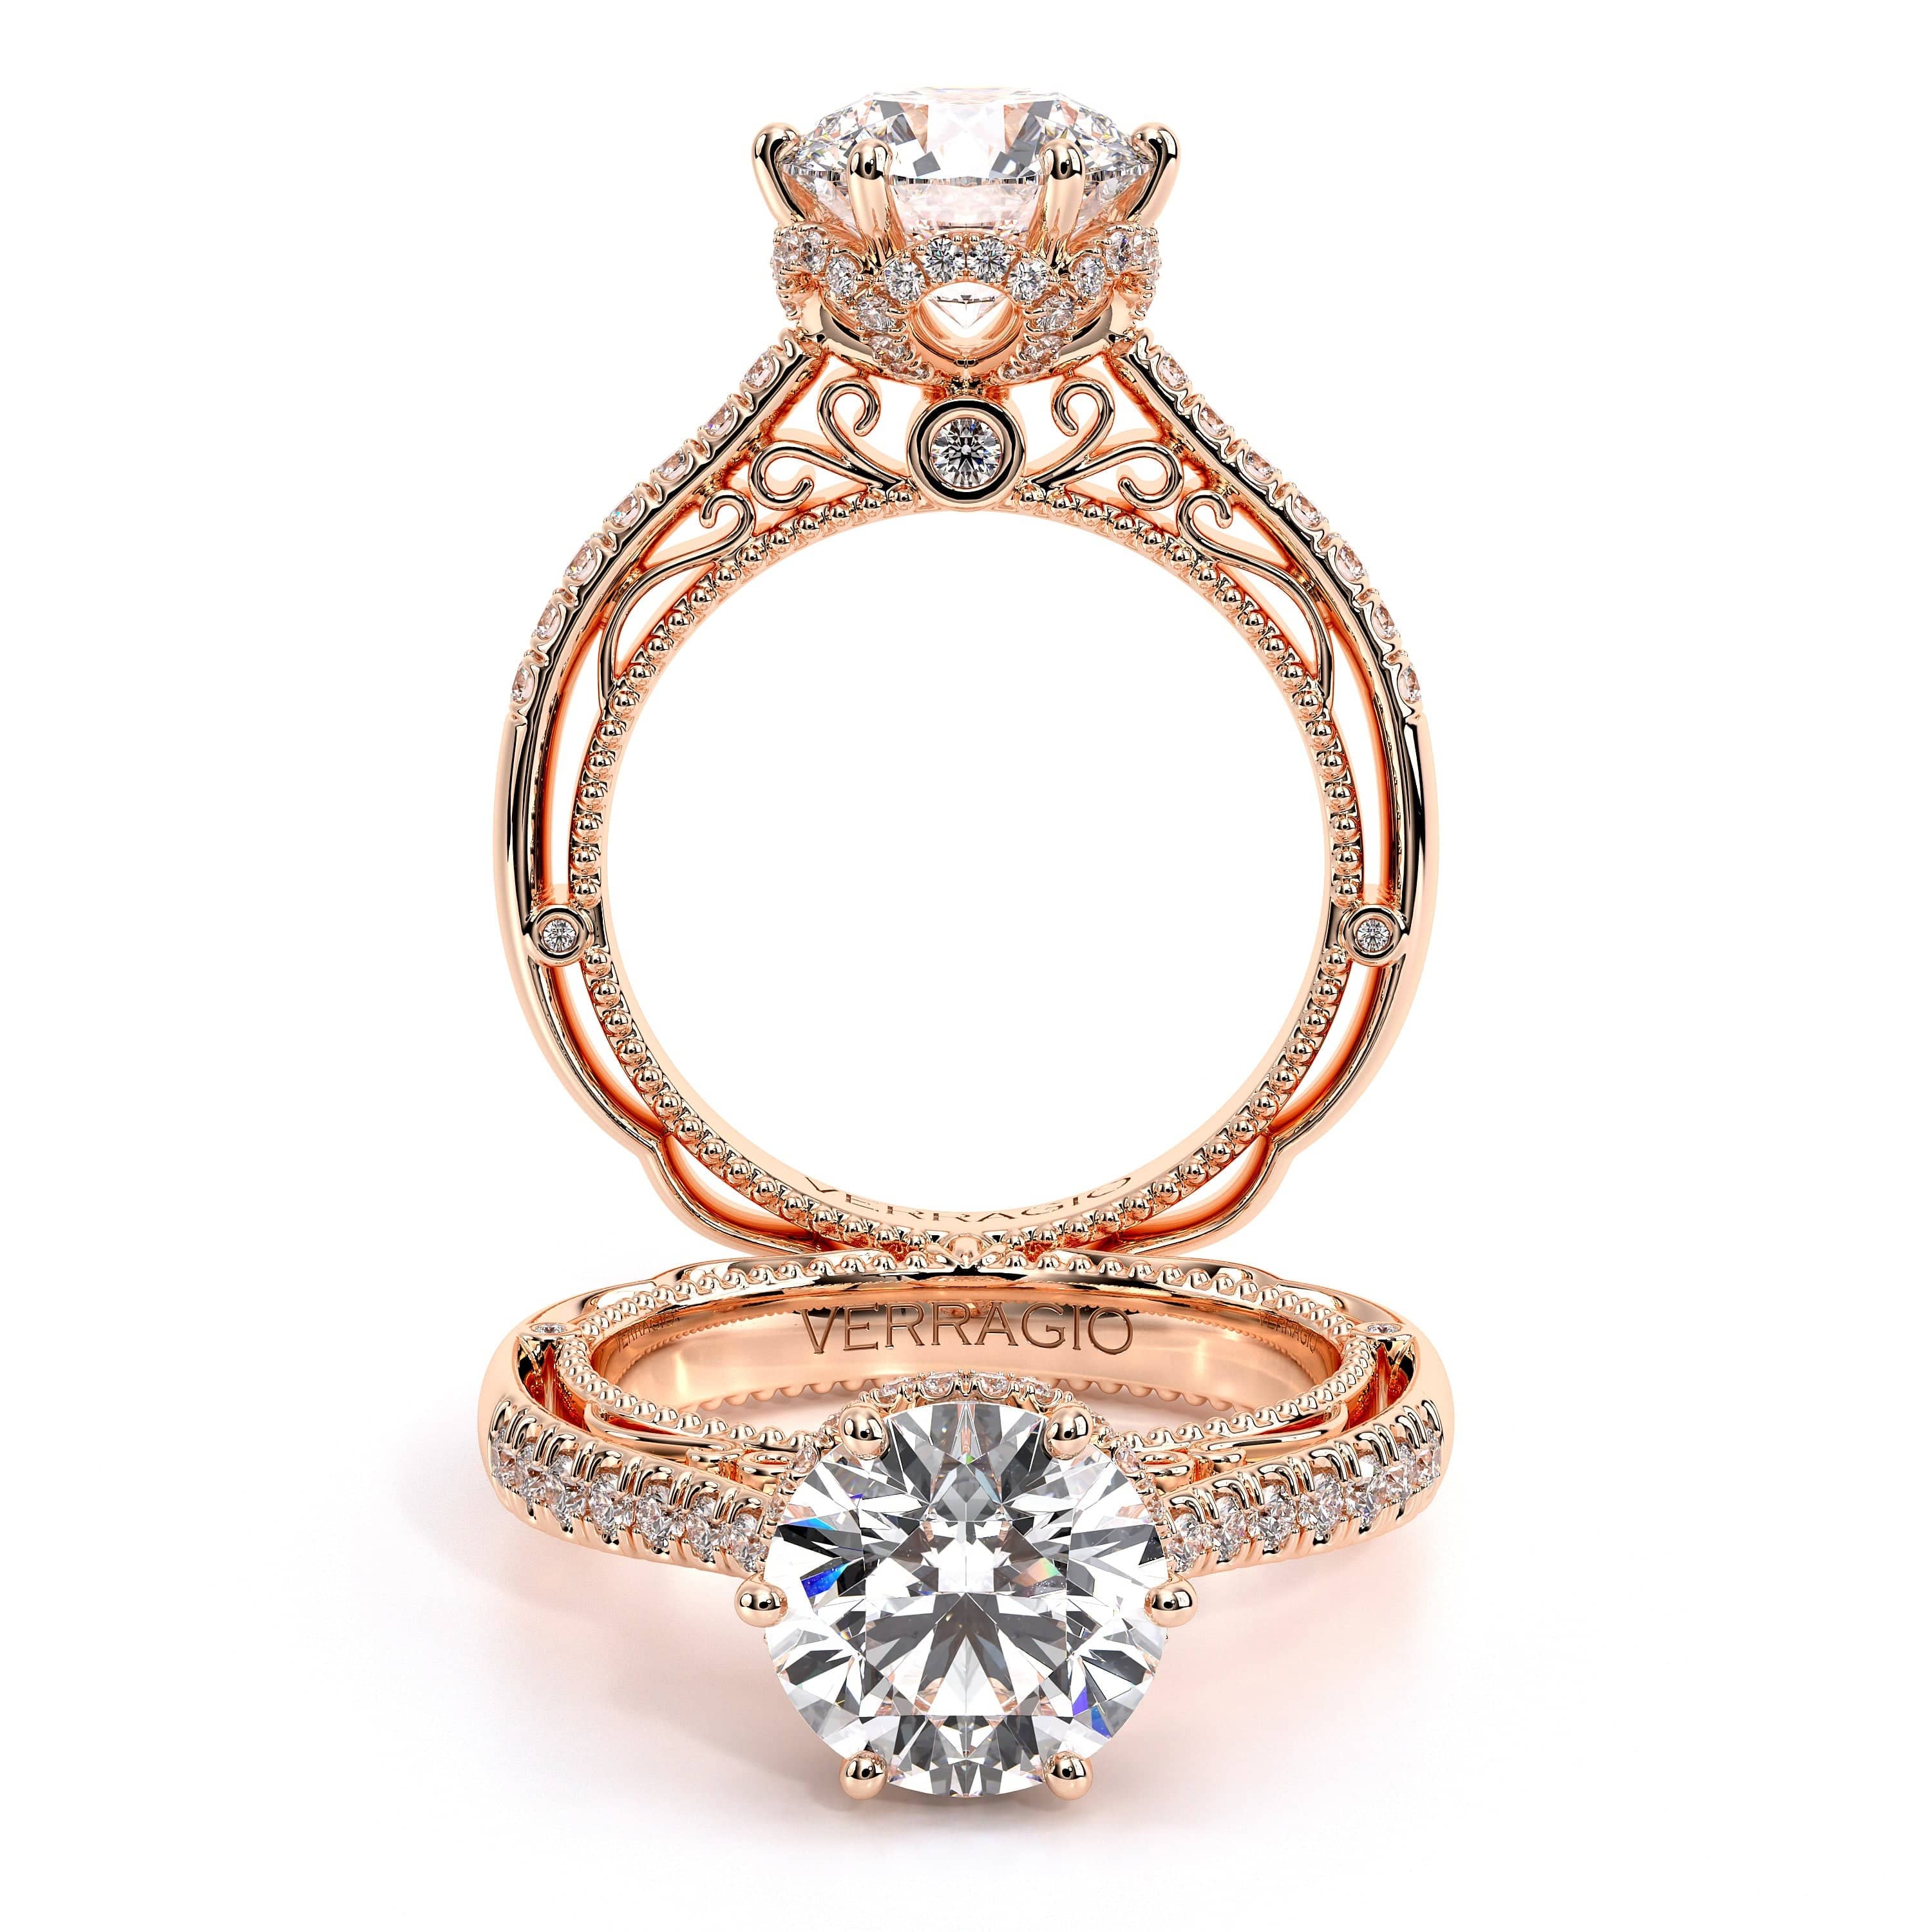 Emerald Lady Jewelry - Verragio Venetian 5013R Vintage Inspired Engagement  Ring in White & Rose Gold - ❤️❤️❤️ Love, Love, Love! #Verragio  #coutureengagementrings #engaged #gettingmarried #hey30a  #verragioengagementrings #engagementrings #theknot ...